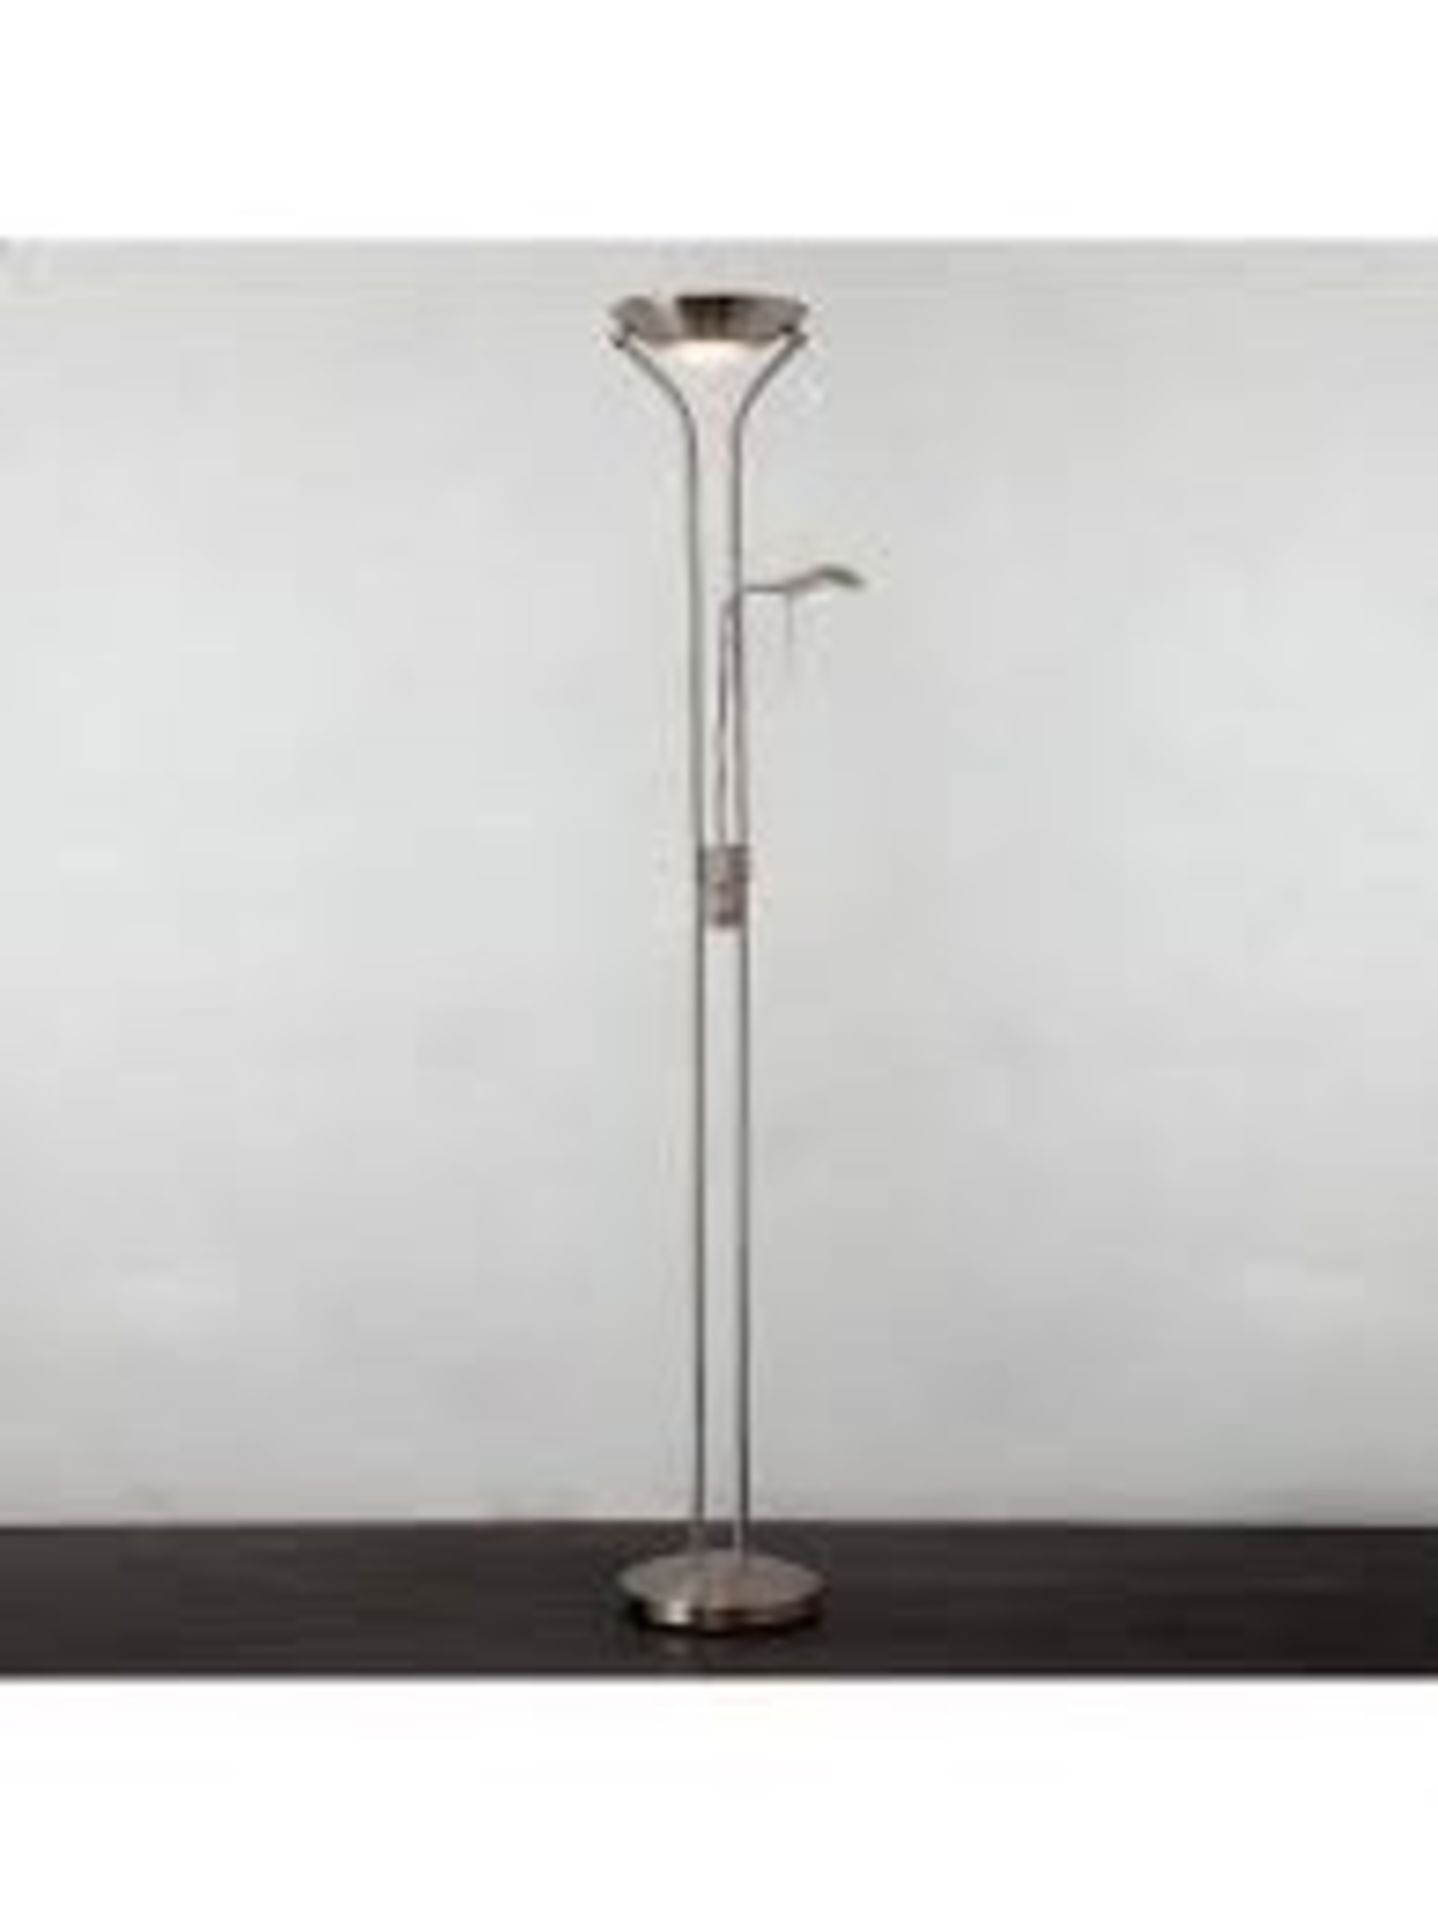 Boxed John Lewis and Partners Zella Stainless Steel Finish Floor Standing Lamp RRP £85 (2395896) (